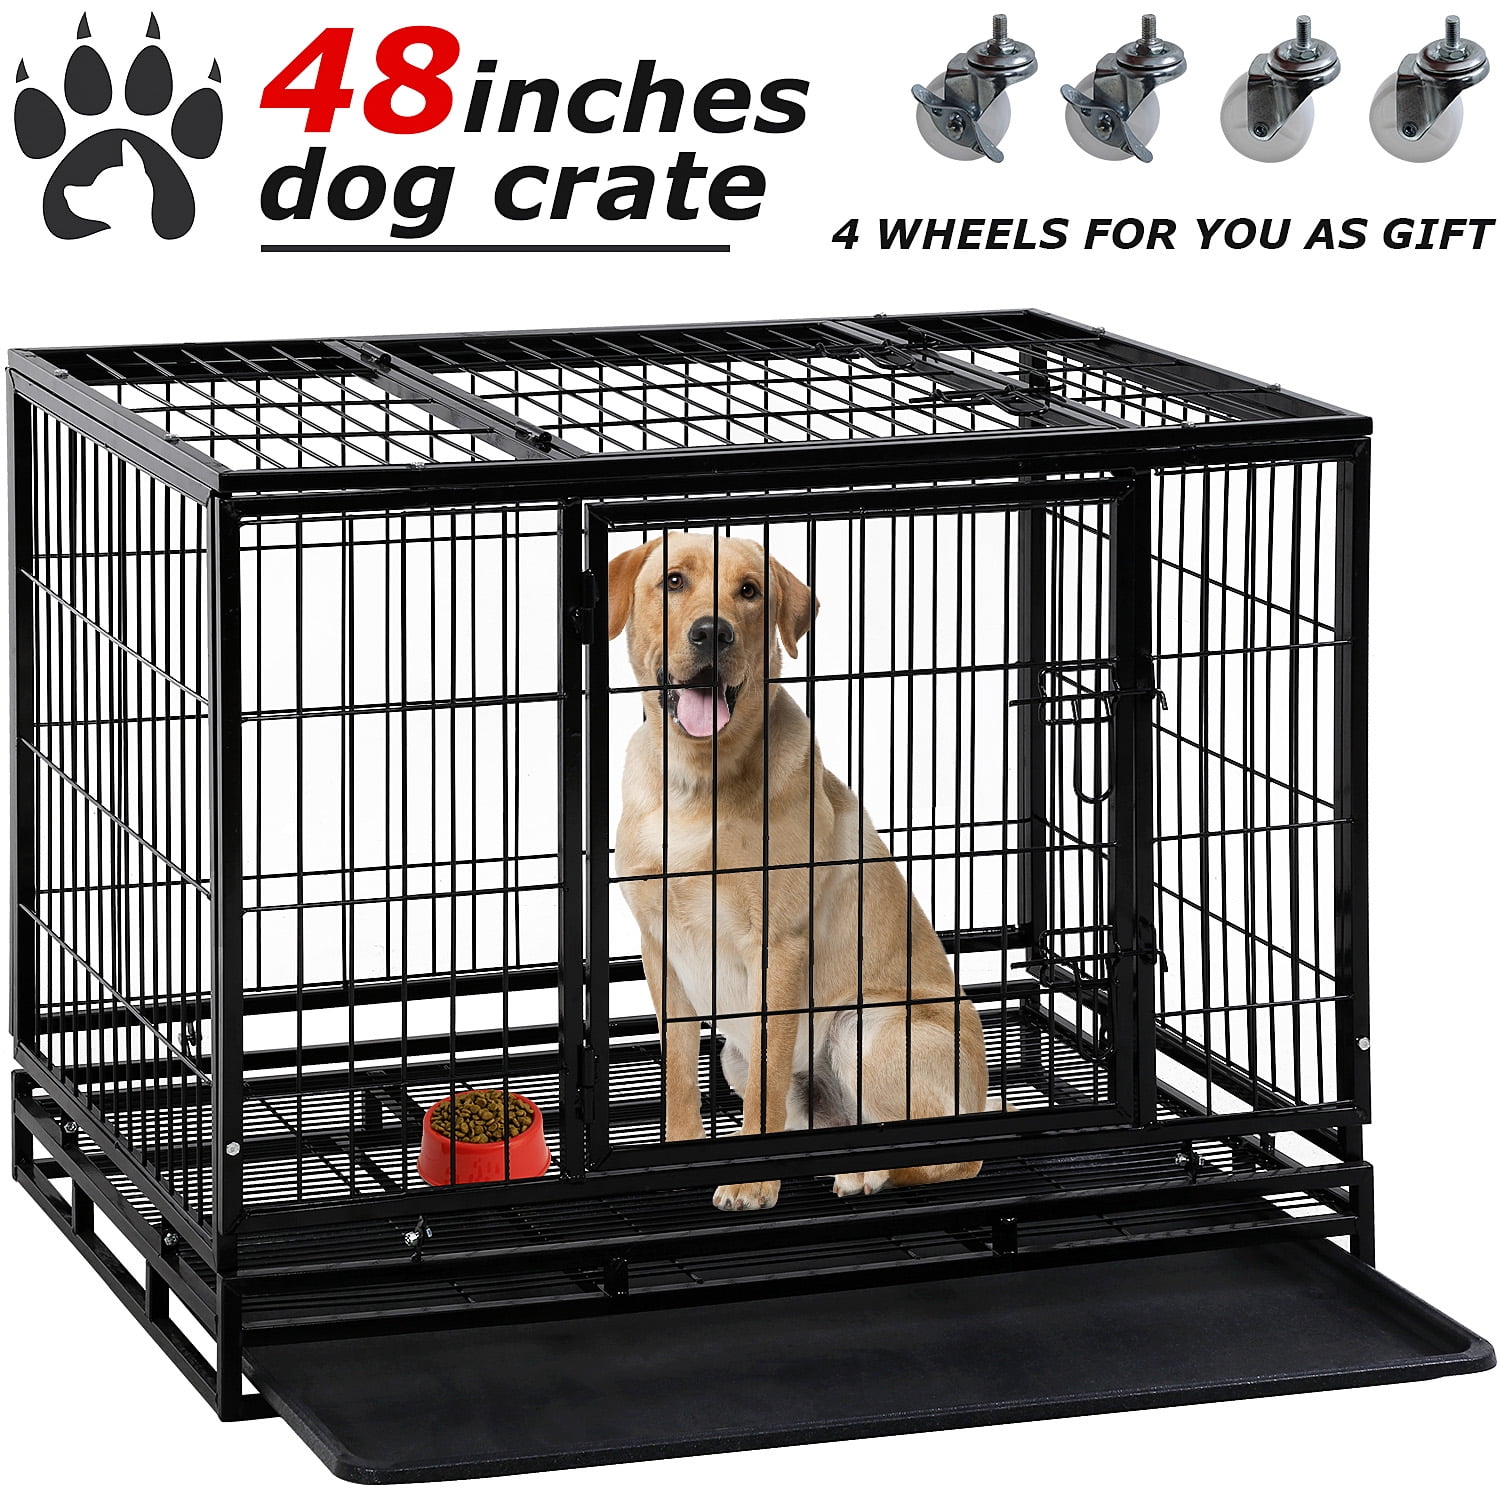 walnest-10-x10-outdoor-steel-dog-cage-xxl-pet-kennel-house-w-cover